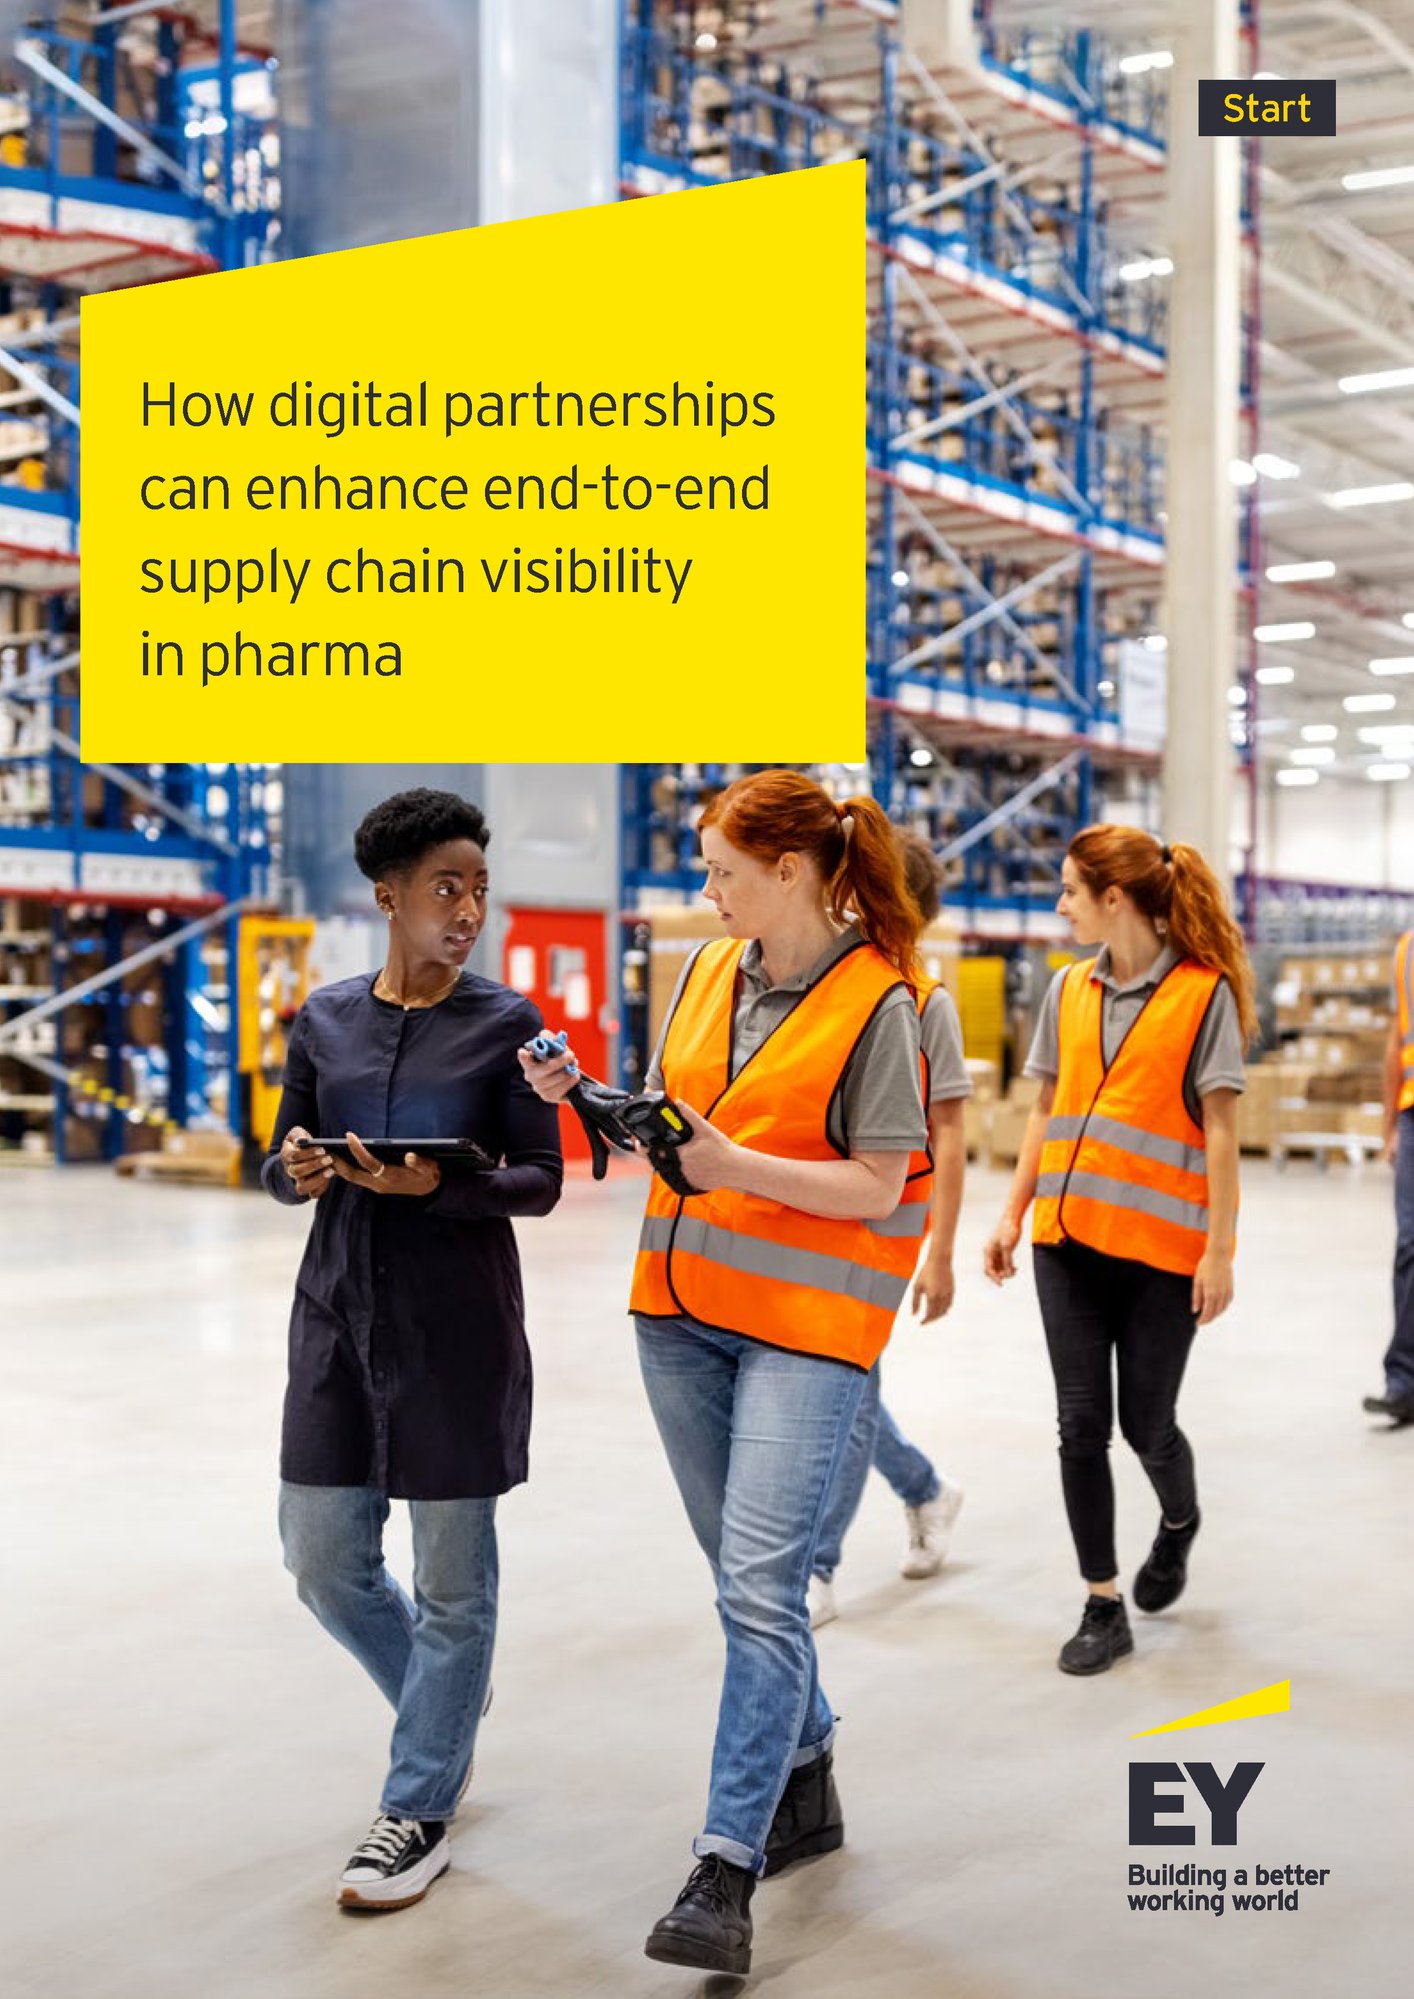 How digital partnerships enhance end-to-end supply chain visibility in pharma